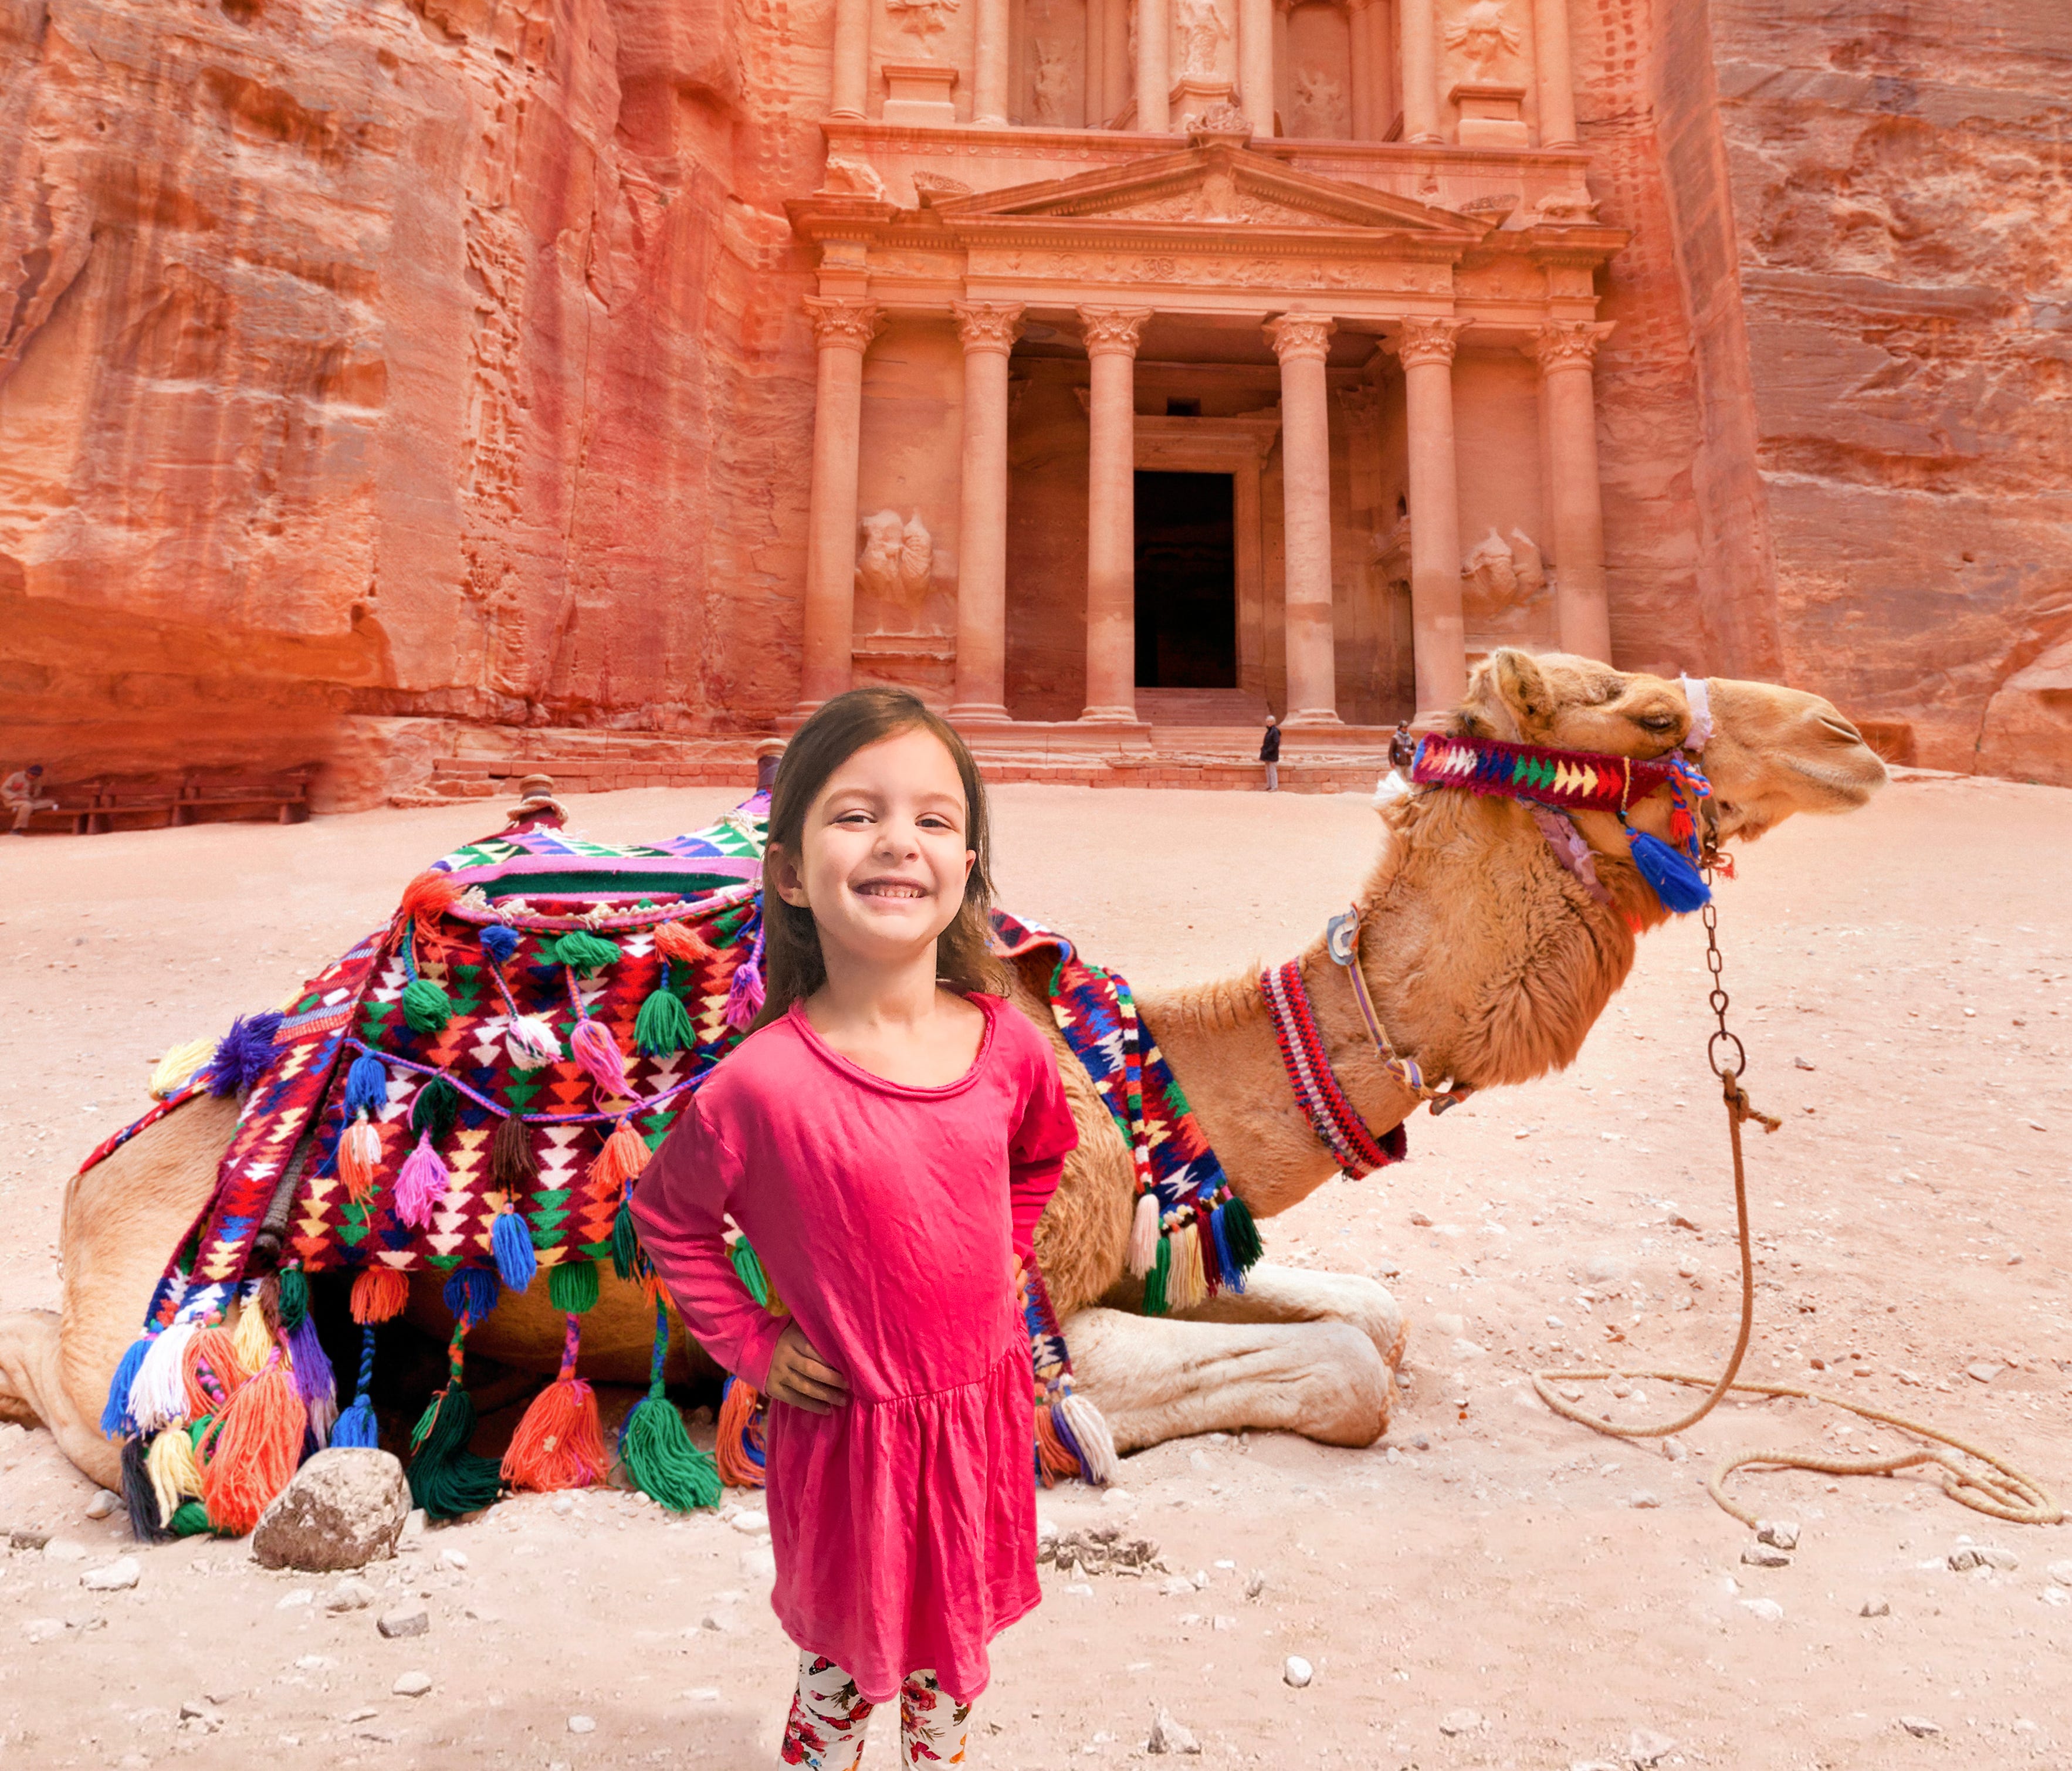 After Krome Photos, this young girl is standing in front of Petra in Jordan.